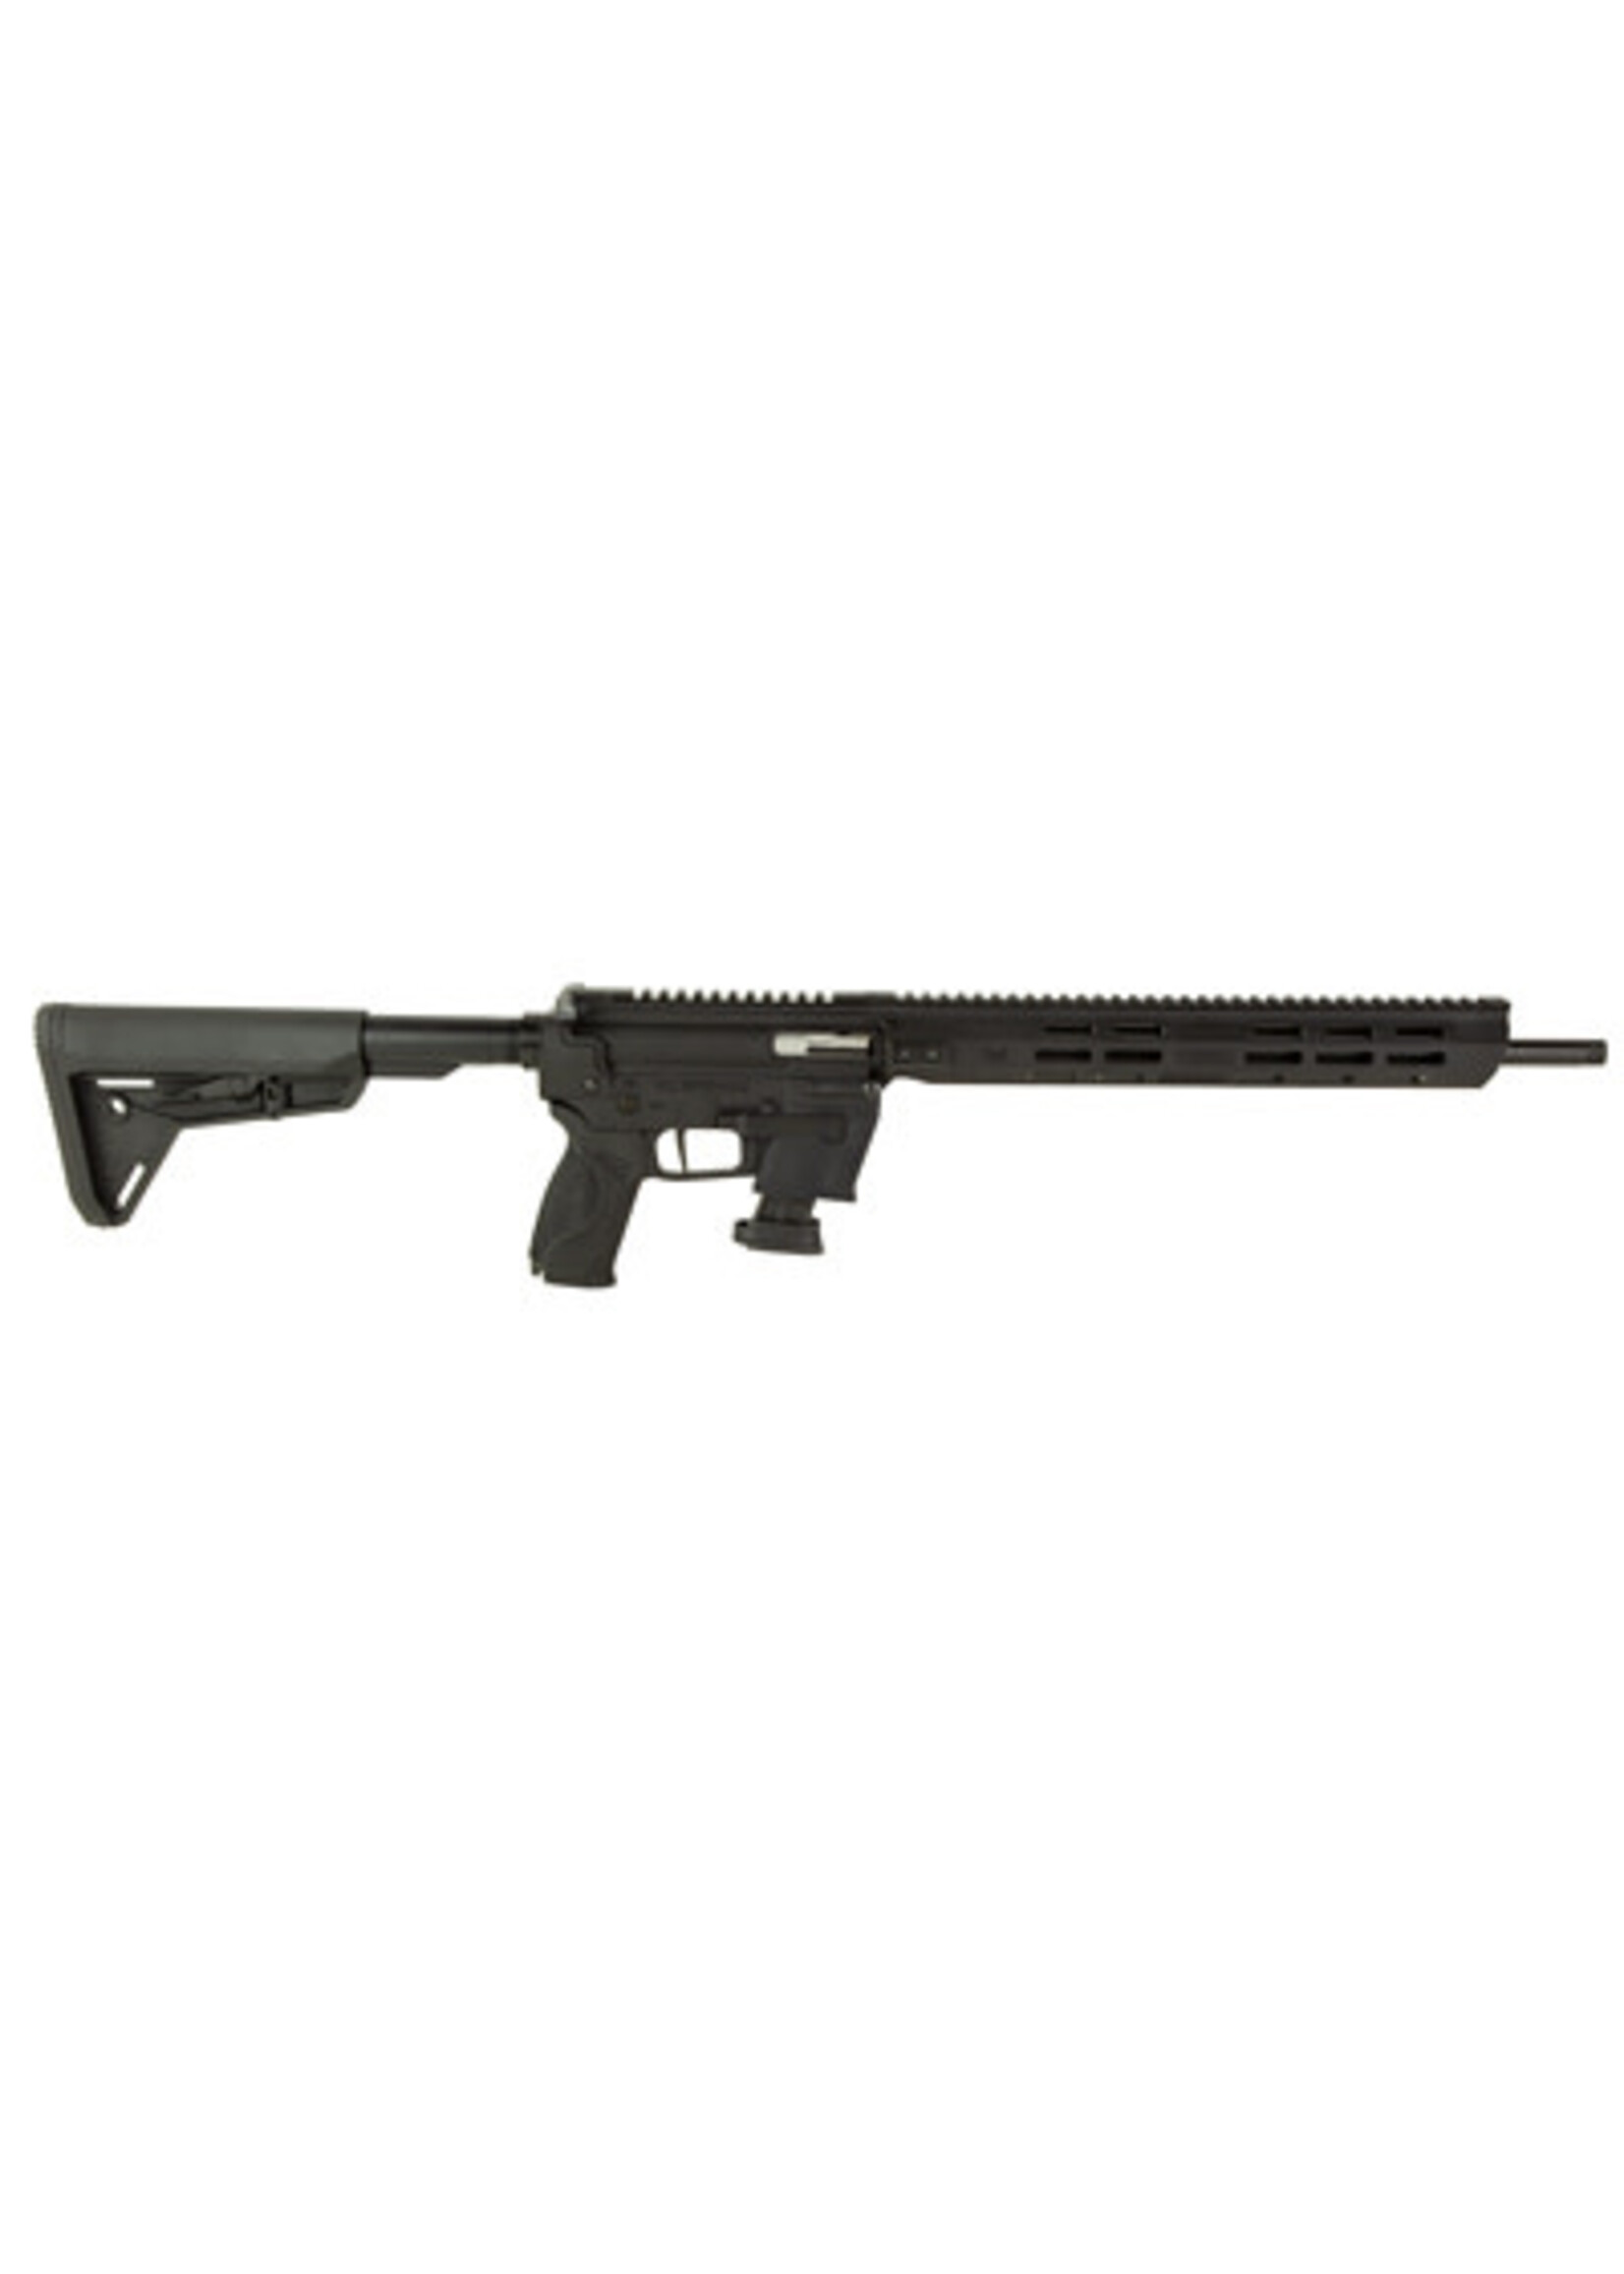 Smith and Wesson (S&W) Smith & Wesson 13800 Response 9mm Luger 10+1 (2) 16.50" Threaded, Black, M-LOK Handgaurd, Interchangeable Backstrap Grip, Flat Face Trigger, Interchangeable FLEXMAG Mag Well Adapter (2)